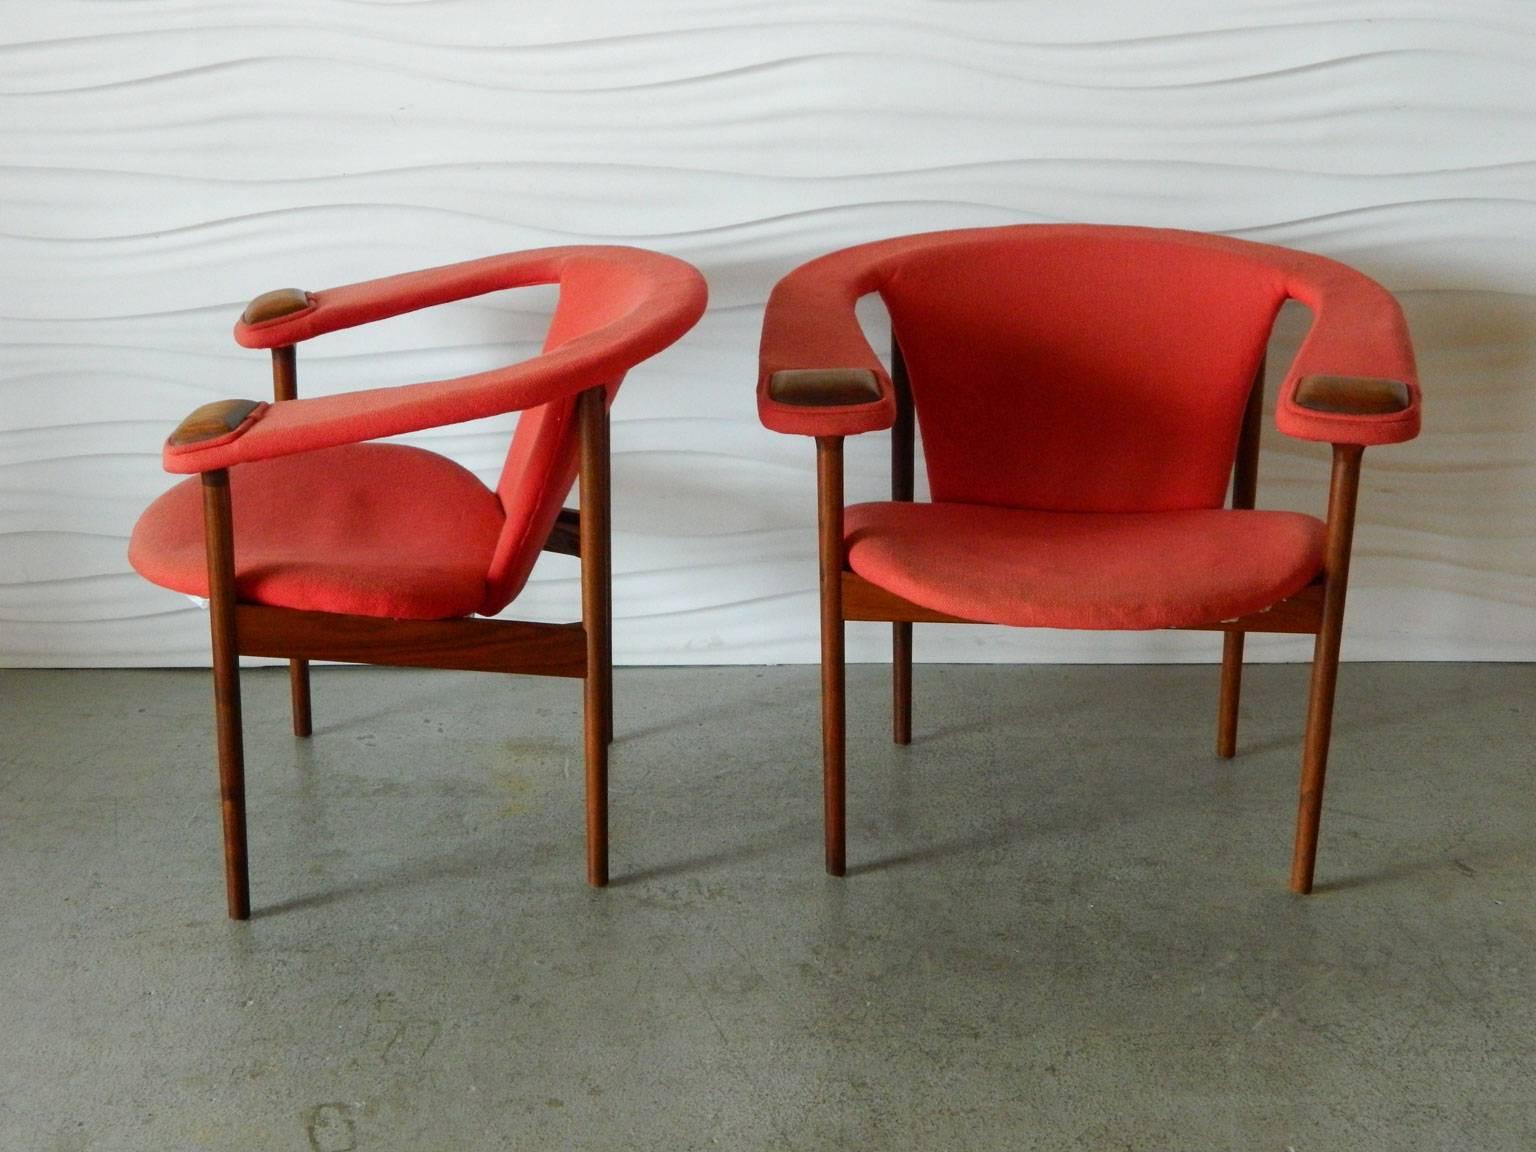 Designed by American designer Adrian Pearsall for Craft and Associates, this pair of armchairs features rounded back supports and wood details on the arms.
 